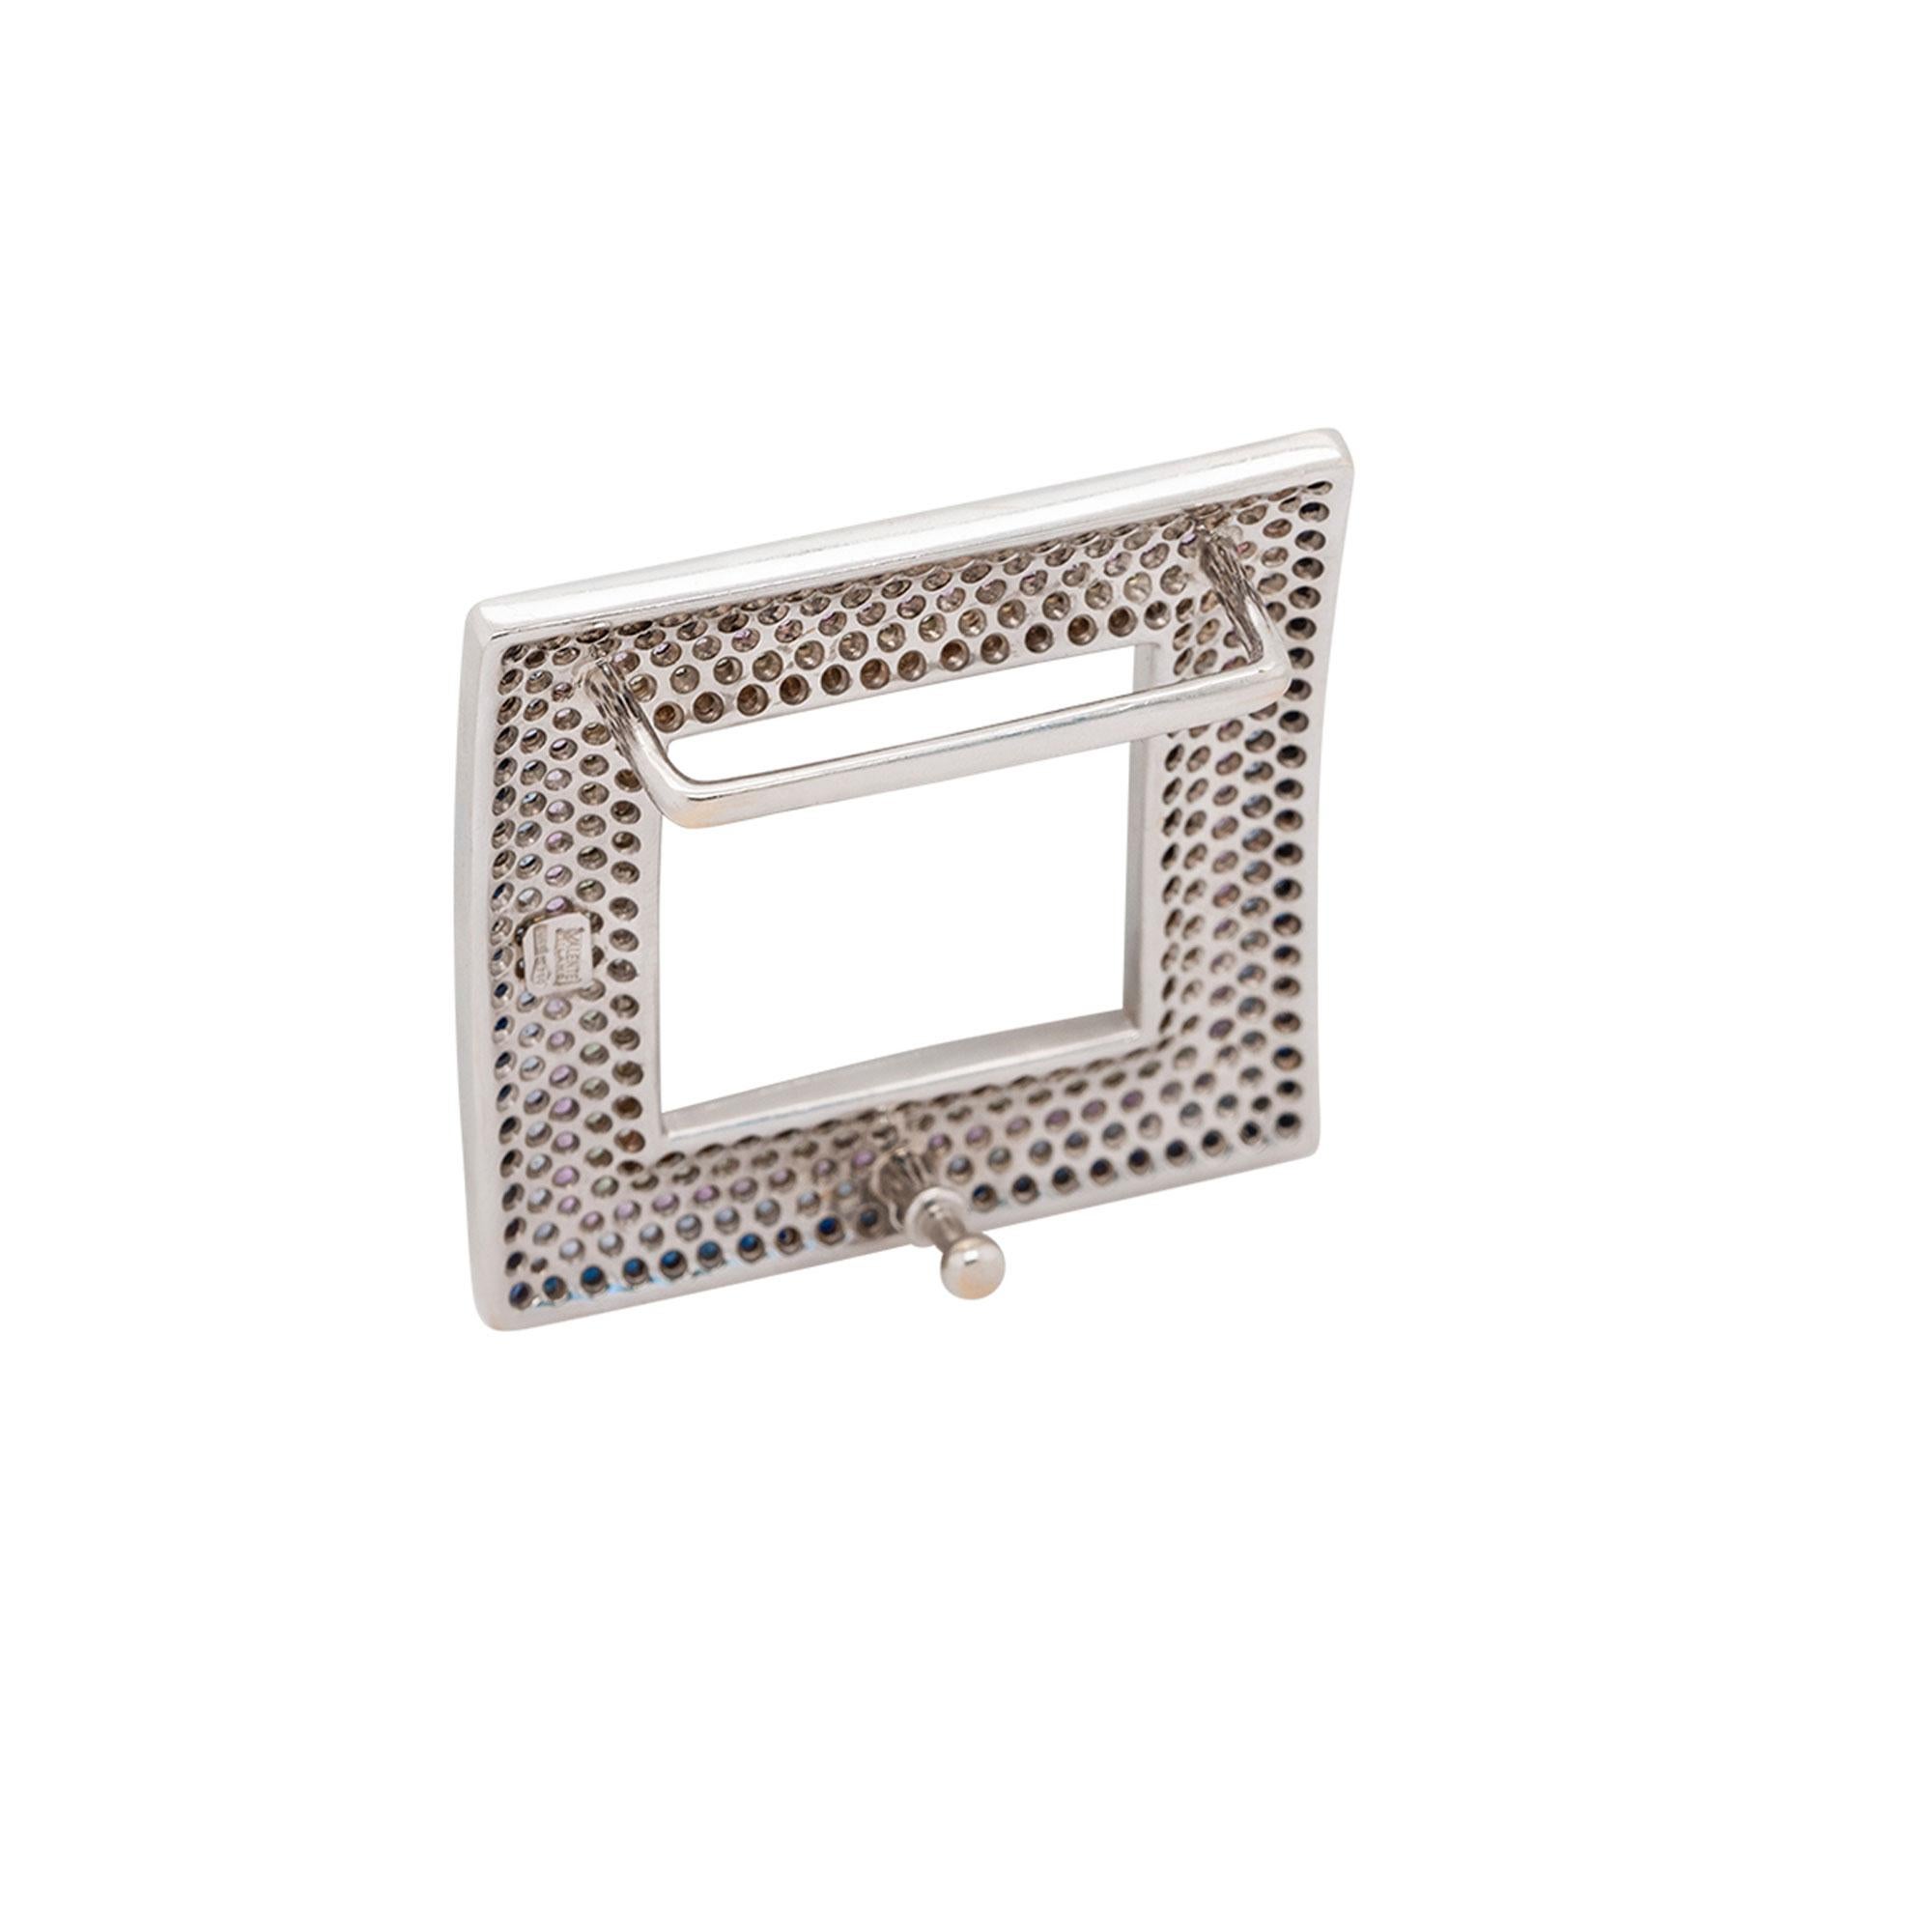 Diamond & Sapphire Pave Belt Buckle 18 Karat in Stock In Excellent Condition For Sale In Boca Raton, FL